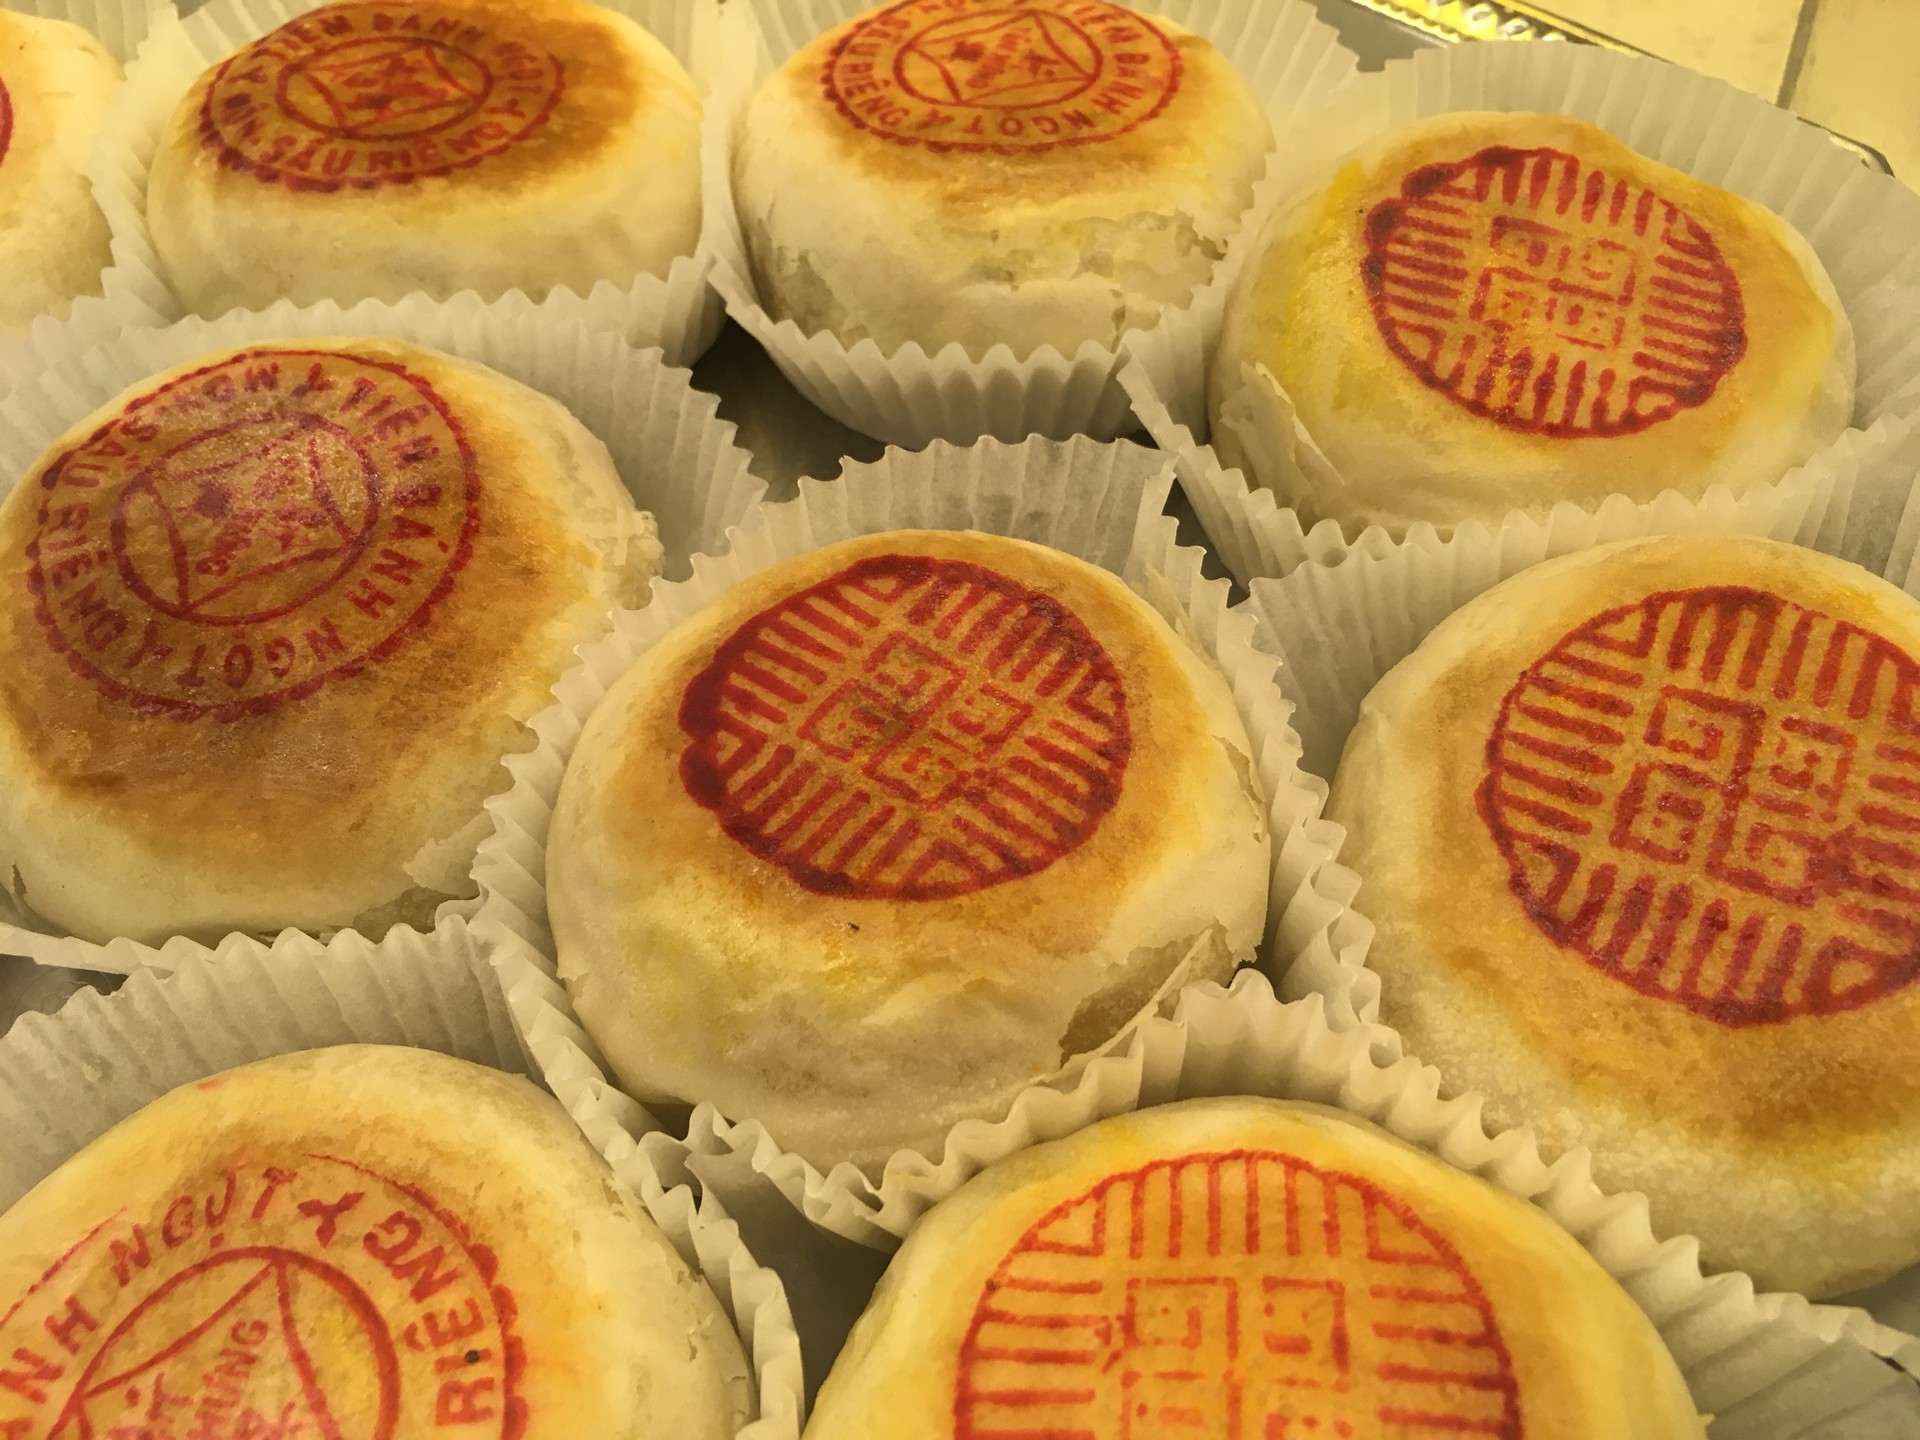 Bánh pía resemble the Cantonese mooncake, but these feature flaky pastry and the fillings are different, too. The ones in this case at Dzui’s Cakes and Desserts in San Jose features fillings like mung bean paste, durian and pork.